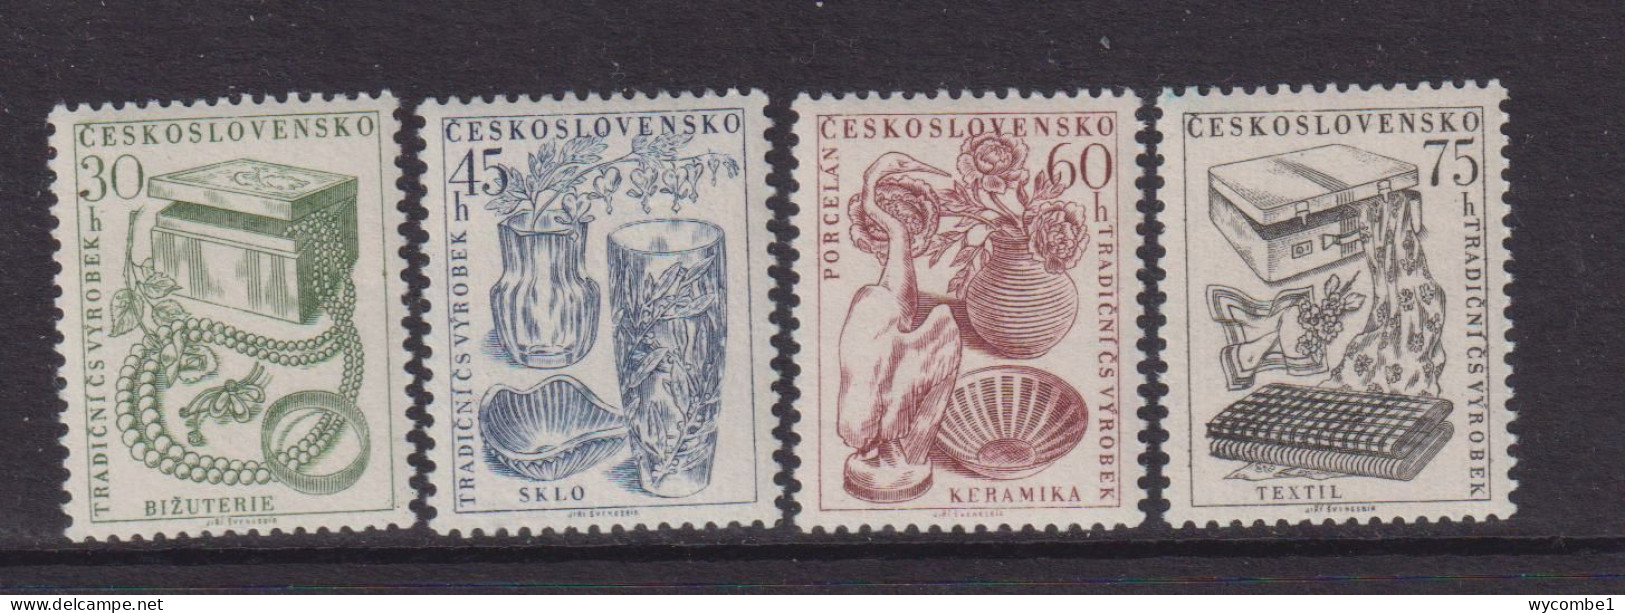 CZECHOSLOVAKIA  - 1956  Country Products Set  Never Hinged Mint - Unused Stamps